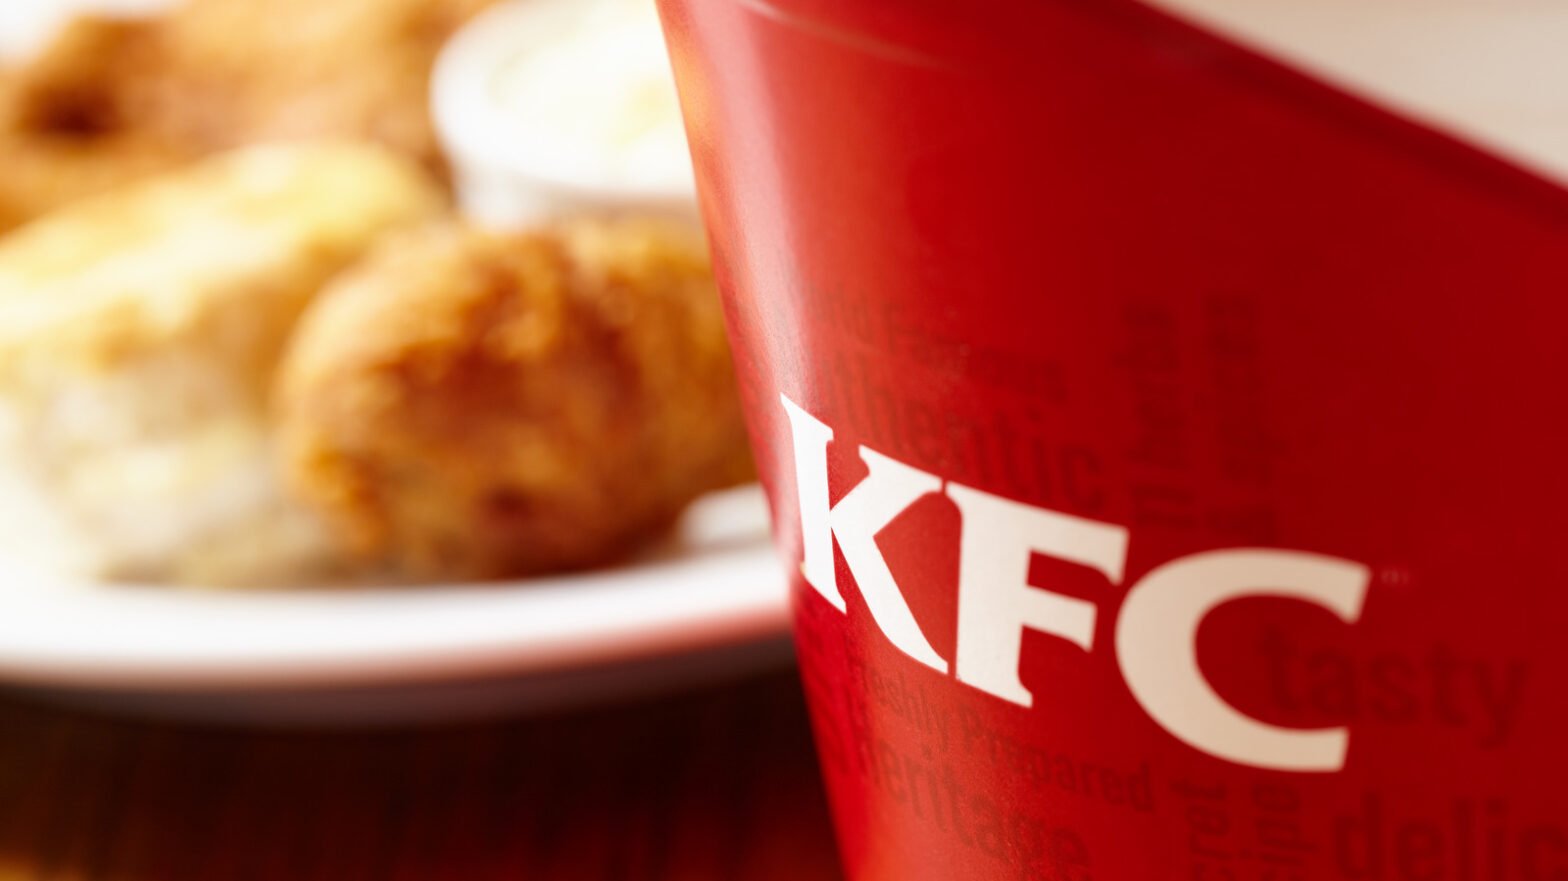 13 Of The Unhealthiest Items At KFC